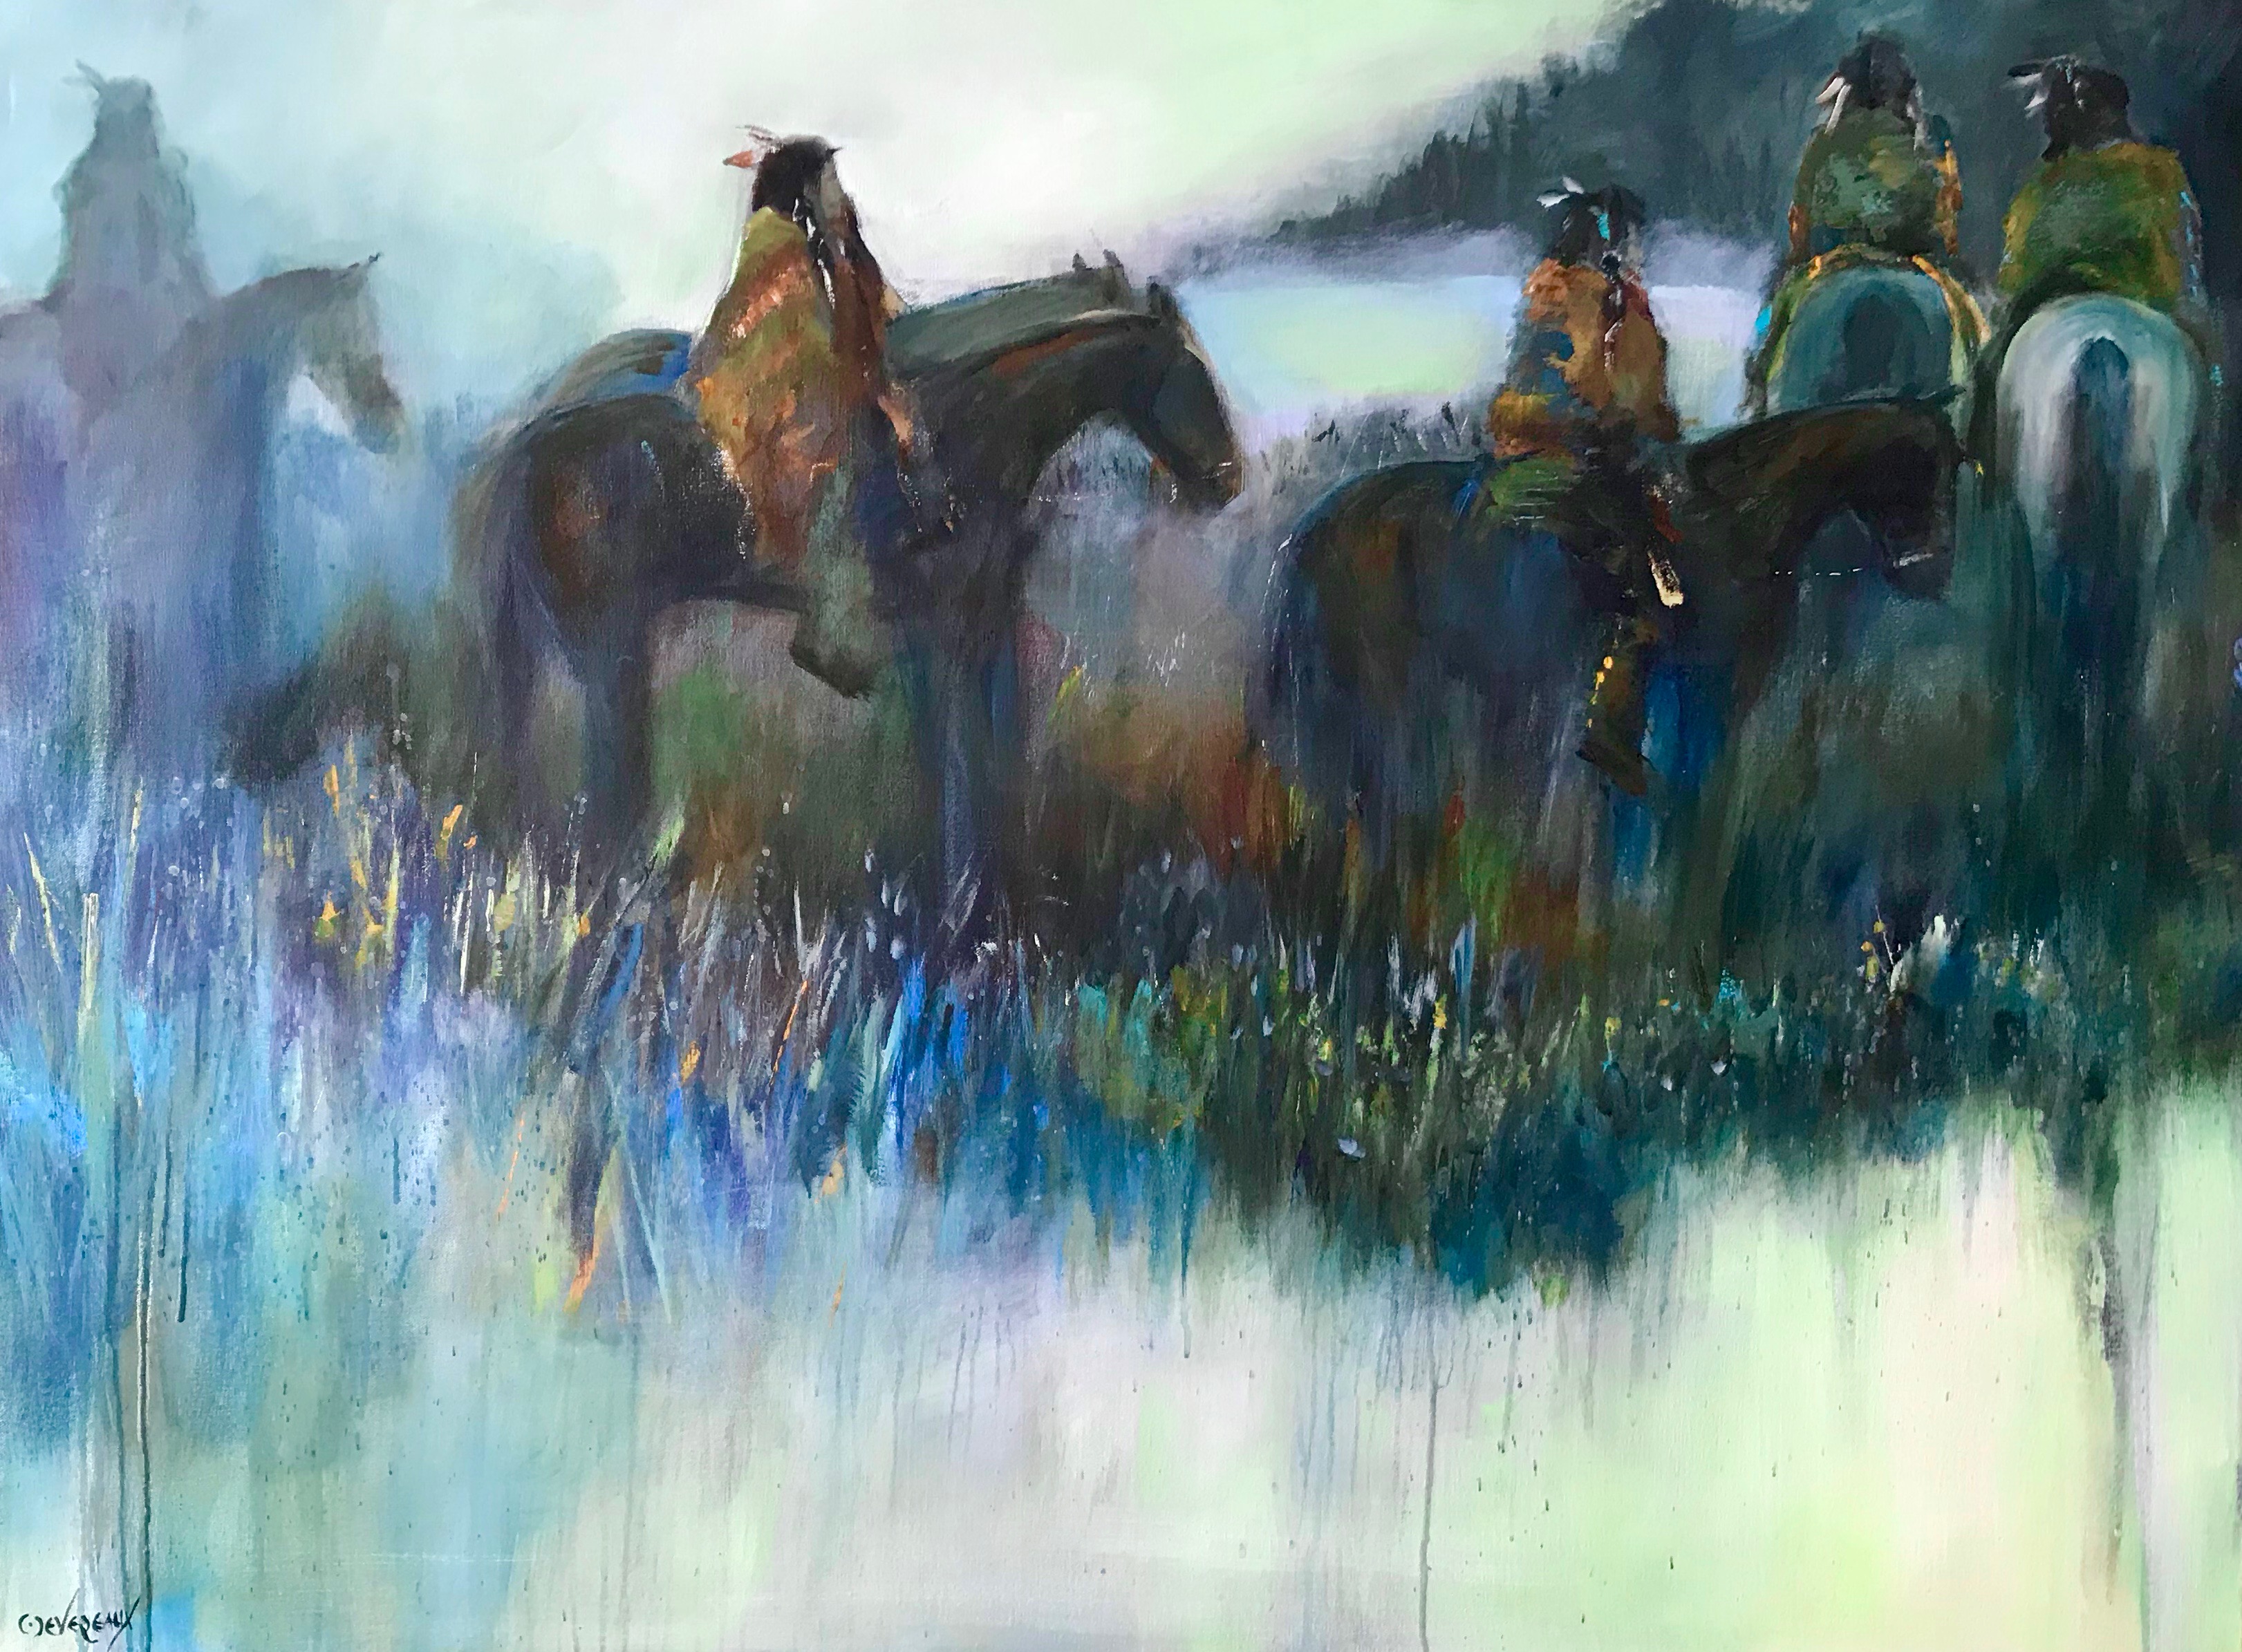 'First Light' 36x48 Contemporary Native American Horse Painting by Cher Devereaux on stretched canvas